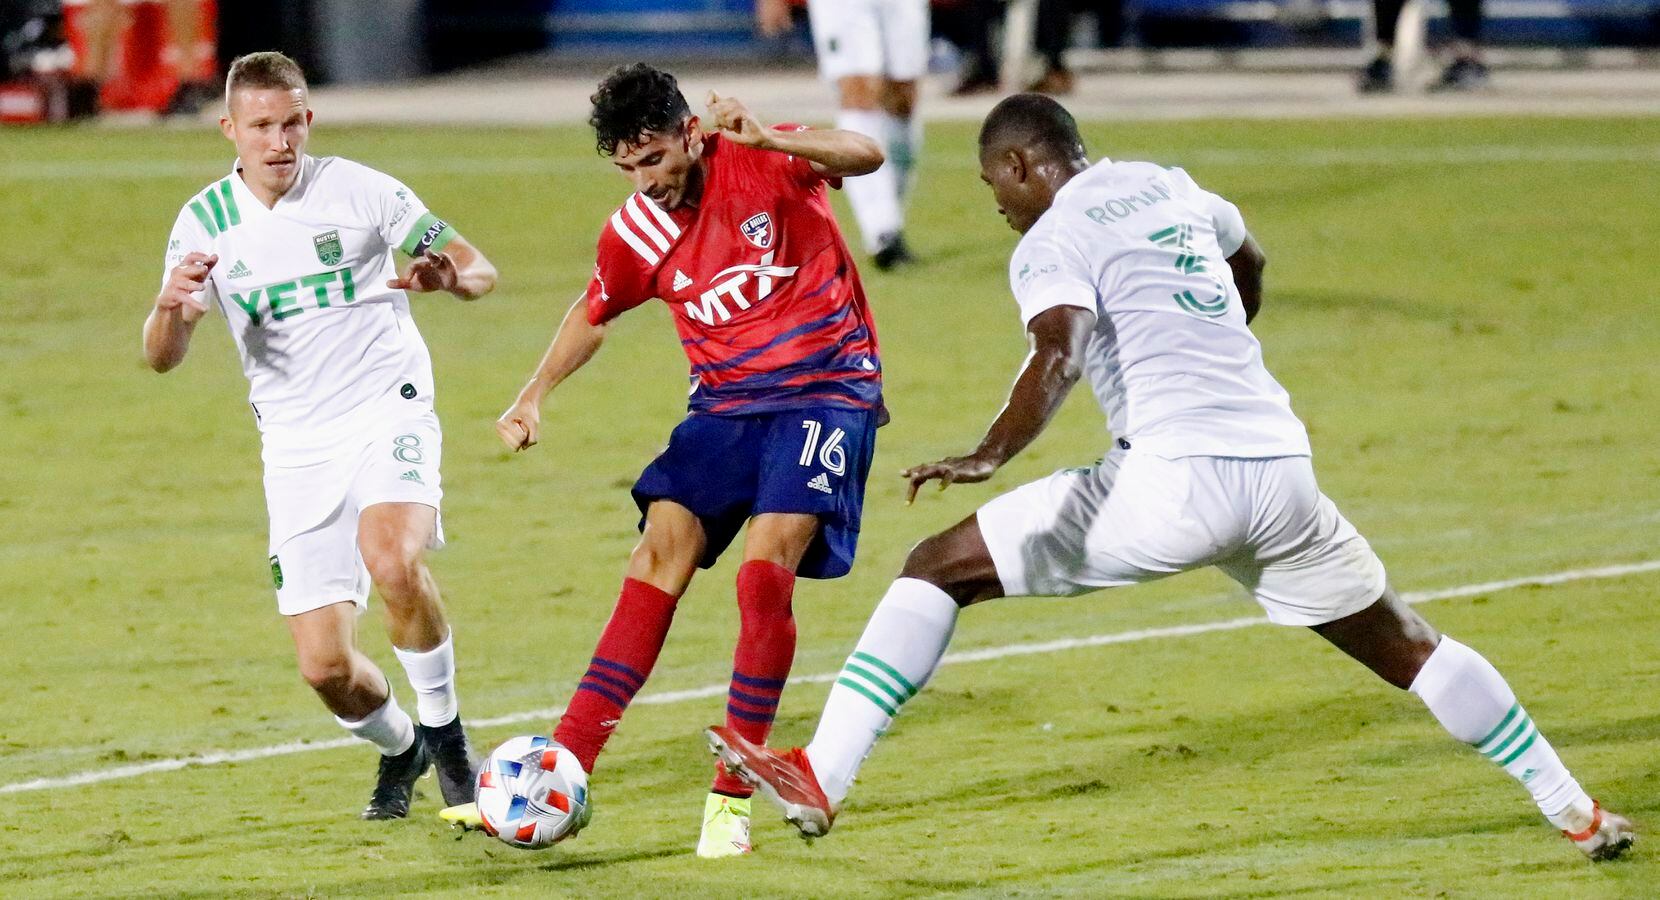 FC Dallas forward Ricardo Pepi (16) shoots between Austin FC midfielder Alexander Ring (8) and Austin FC defender Jhohan Romana (3) during the second half as FC Dallas hosted Austin FC at Toyota Stadium in Frisco on Saturday, October 30, 2021. (Stewart F. House/Special Contributor)